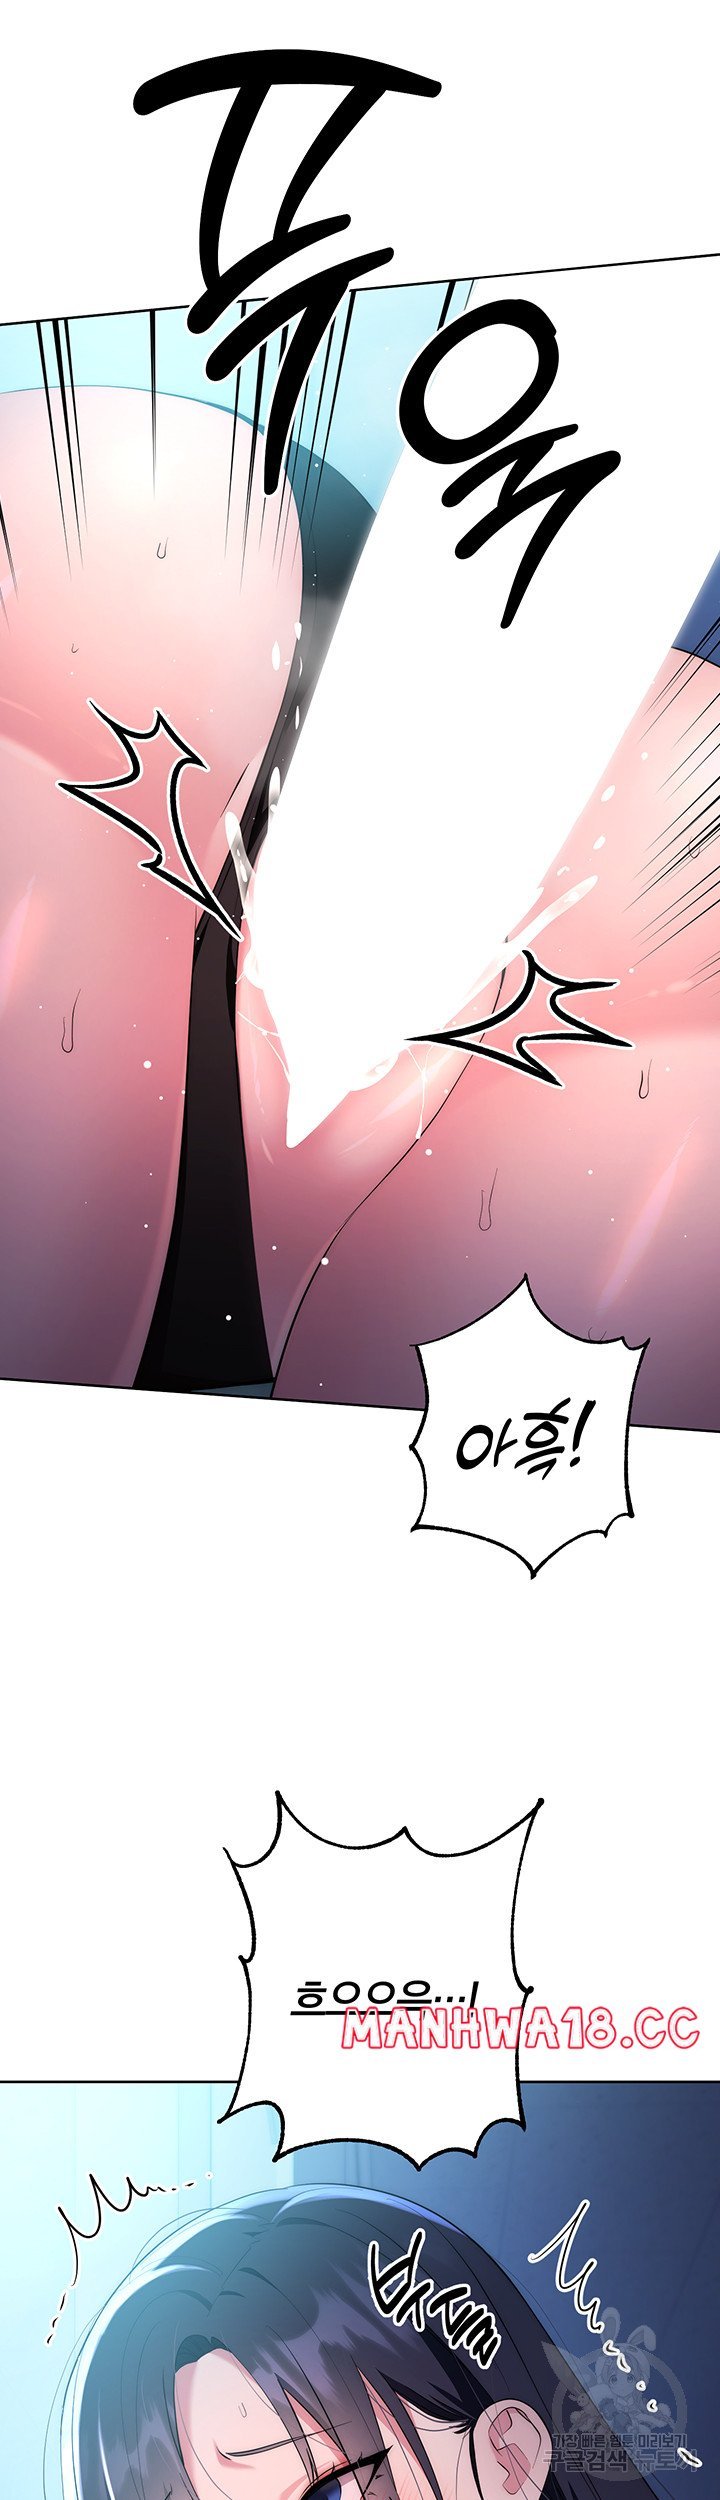 outsider-the-invisible-man-raw-chap-3-36